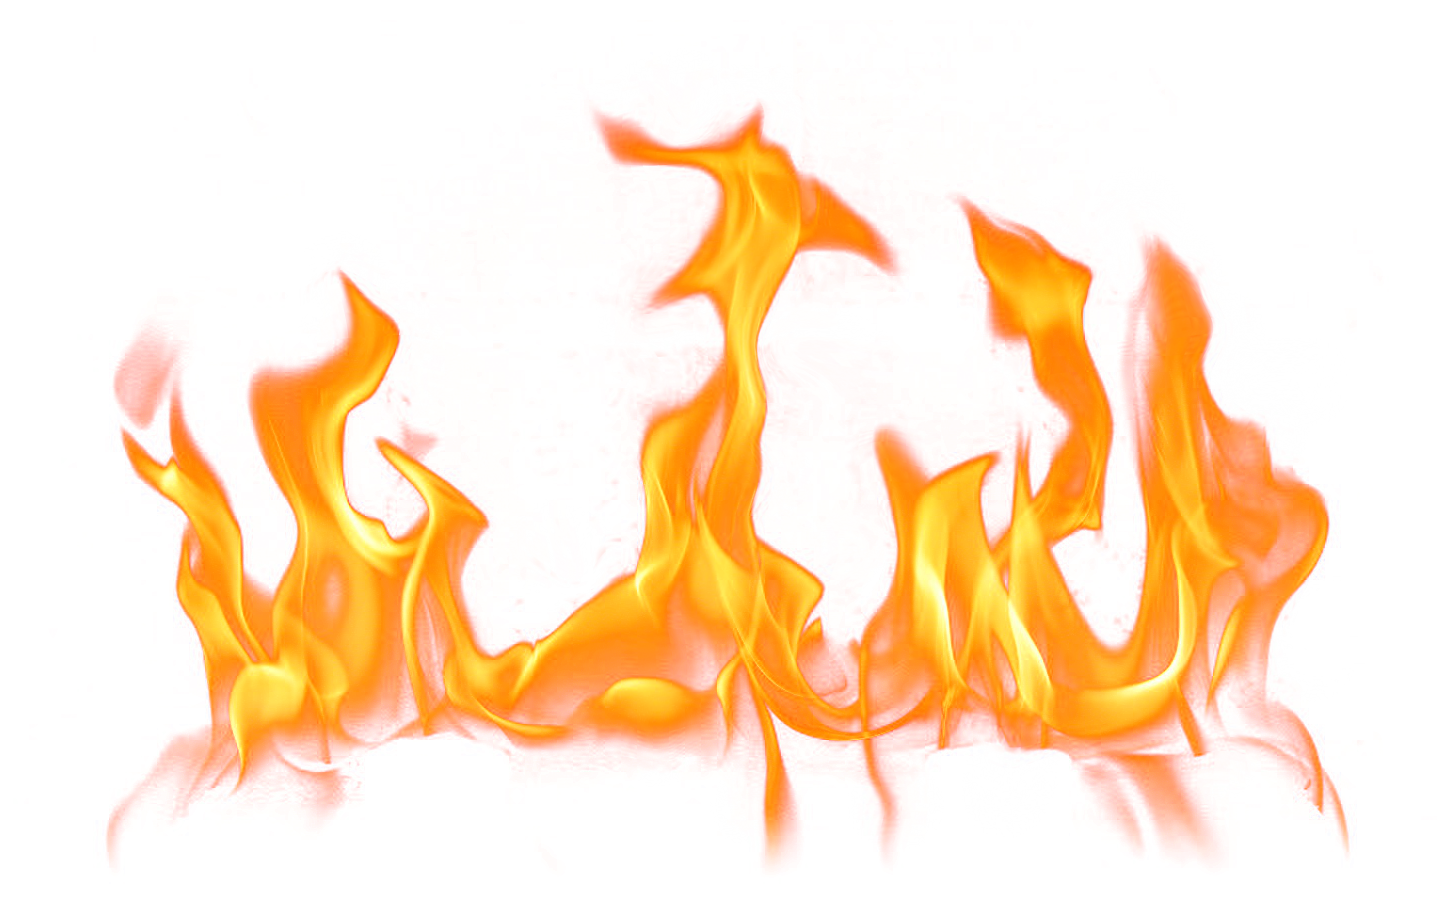 Clipart image gallery yopriceville. Fire border png